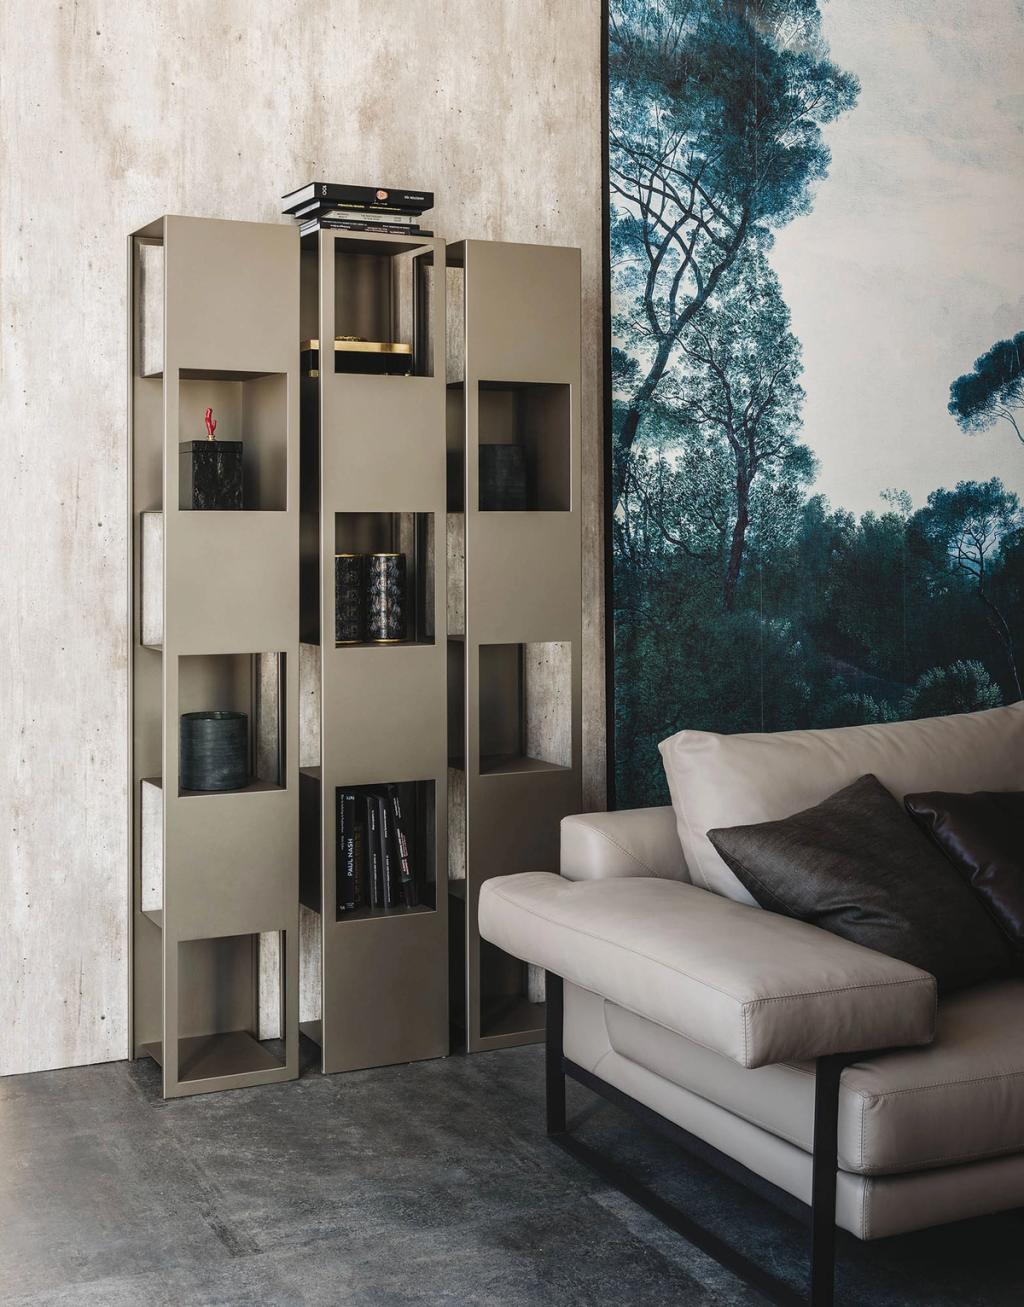 Joker bookcase | Unique Collection Of Designer Furniture From Europe ...